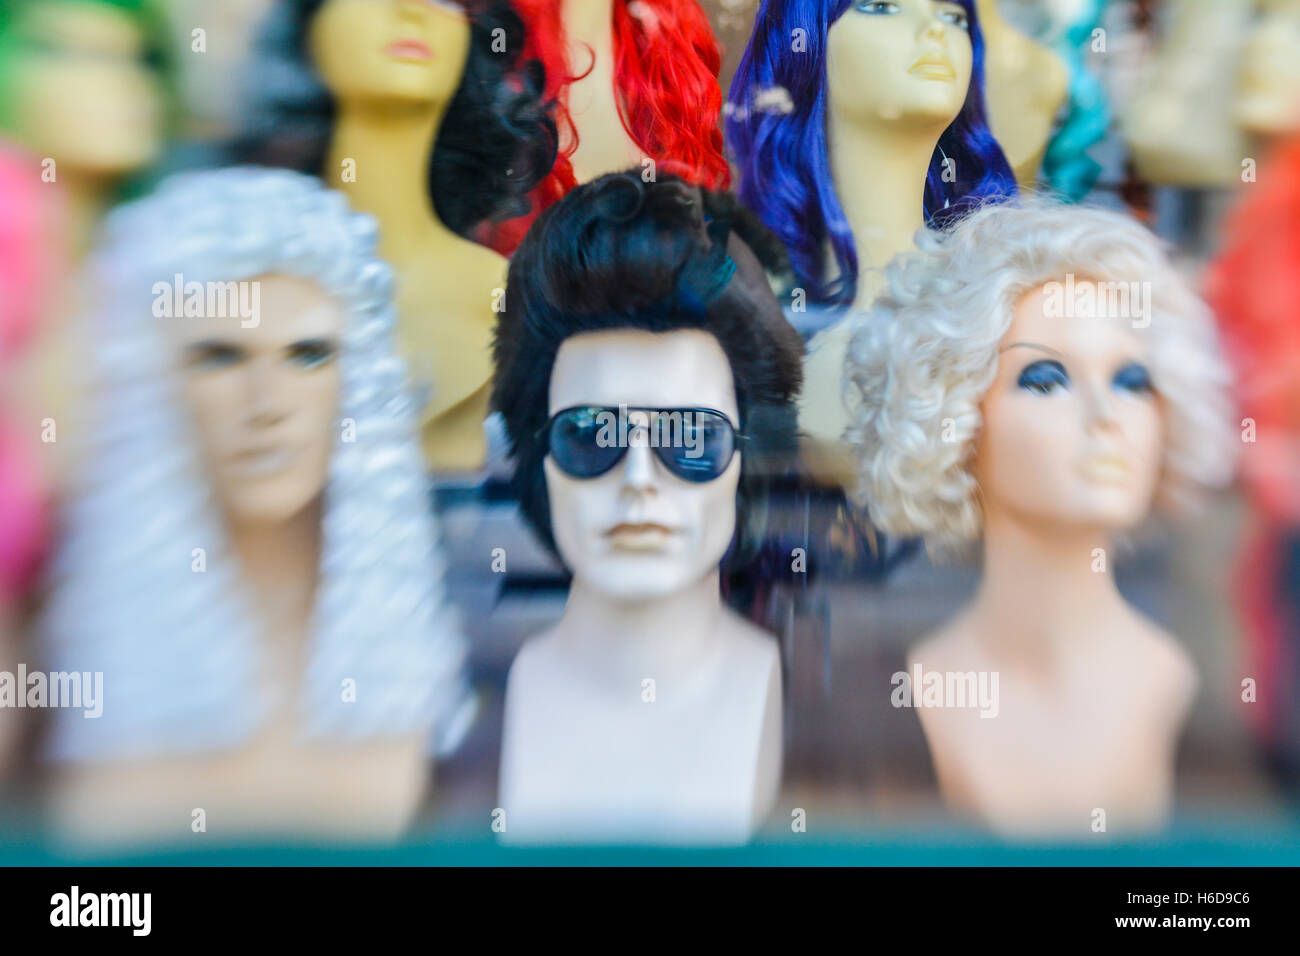 Pyramid shaped display of mannequin heads with wigs